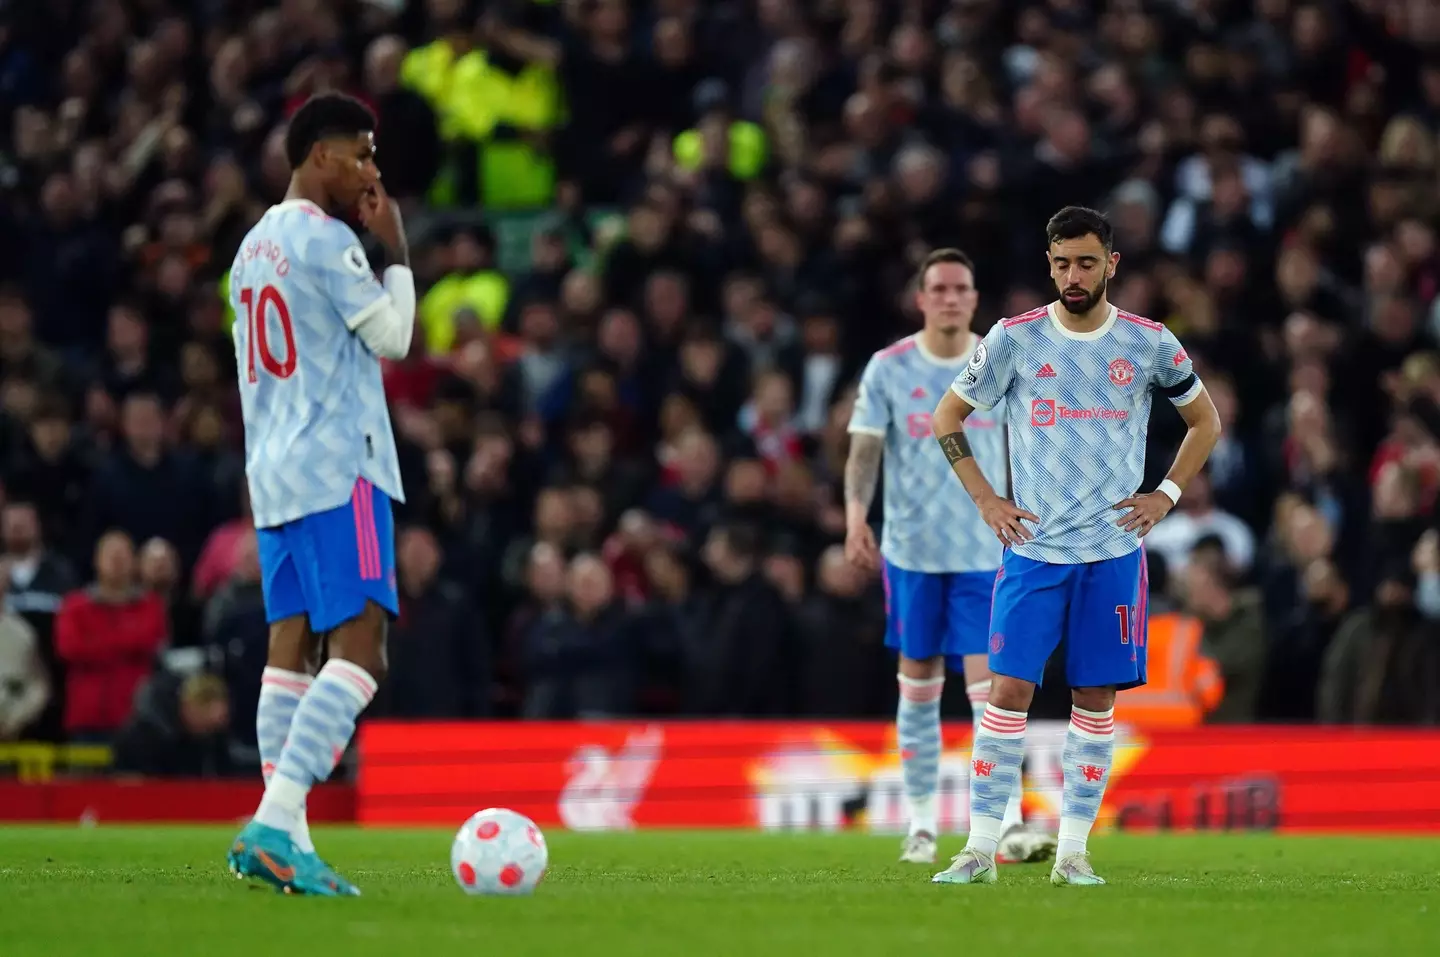 Manchester United players dejected after Salah's goal. Image: PA Images